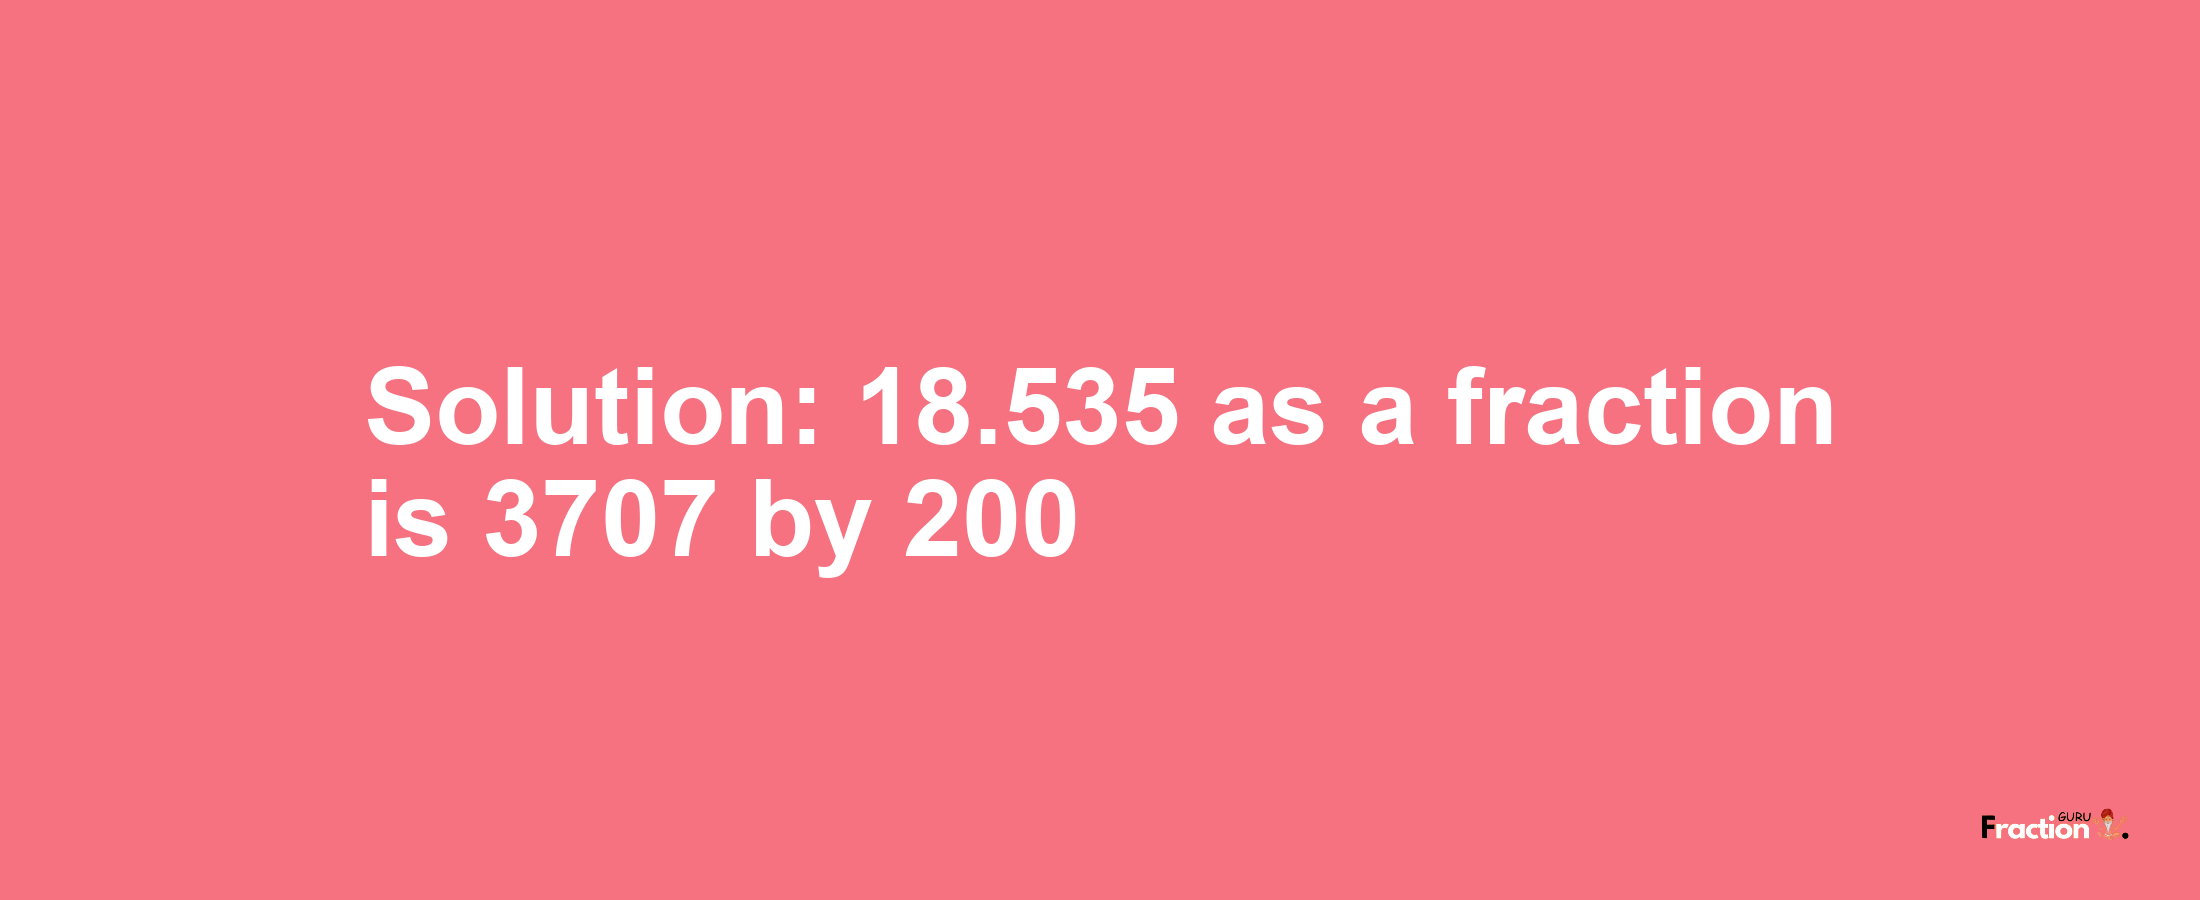 Solution:18.535 as a fraction is 3707/200